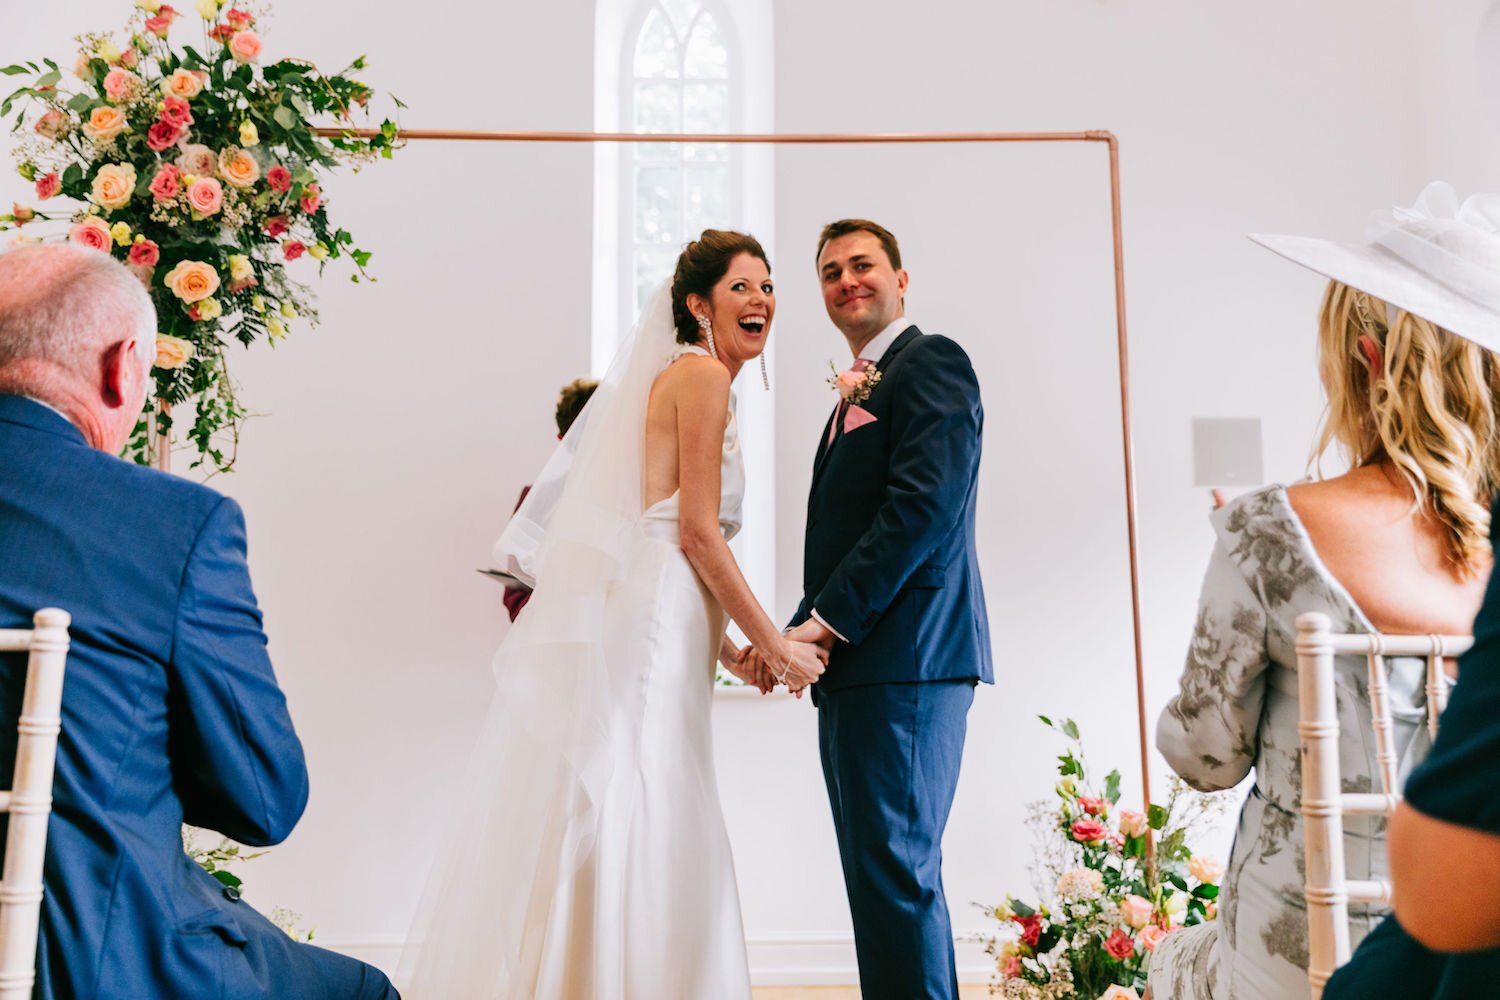 Beautiful bride Carly wore a wedding dress by Halfpenny London